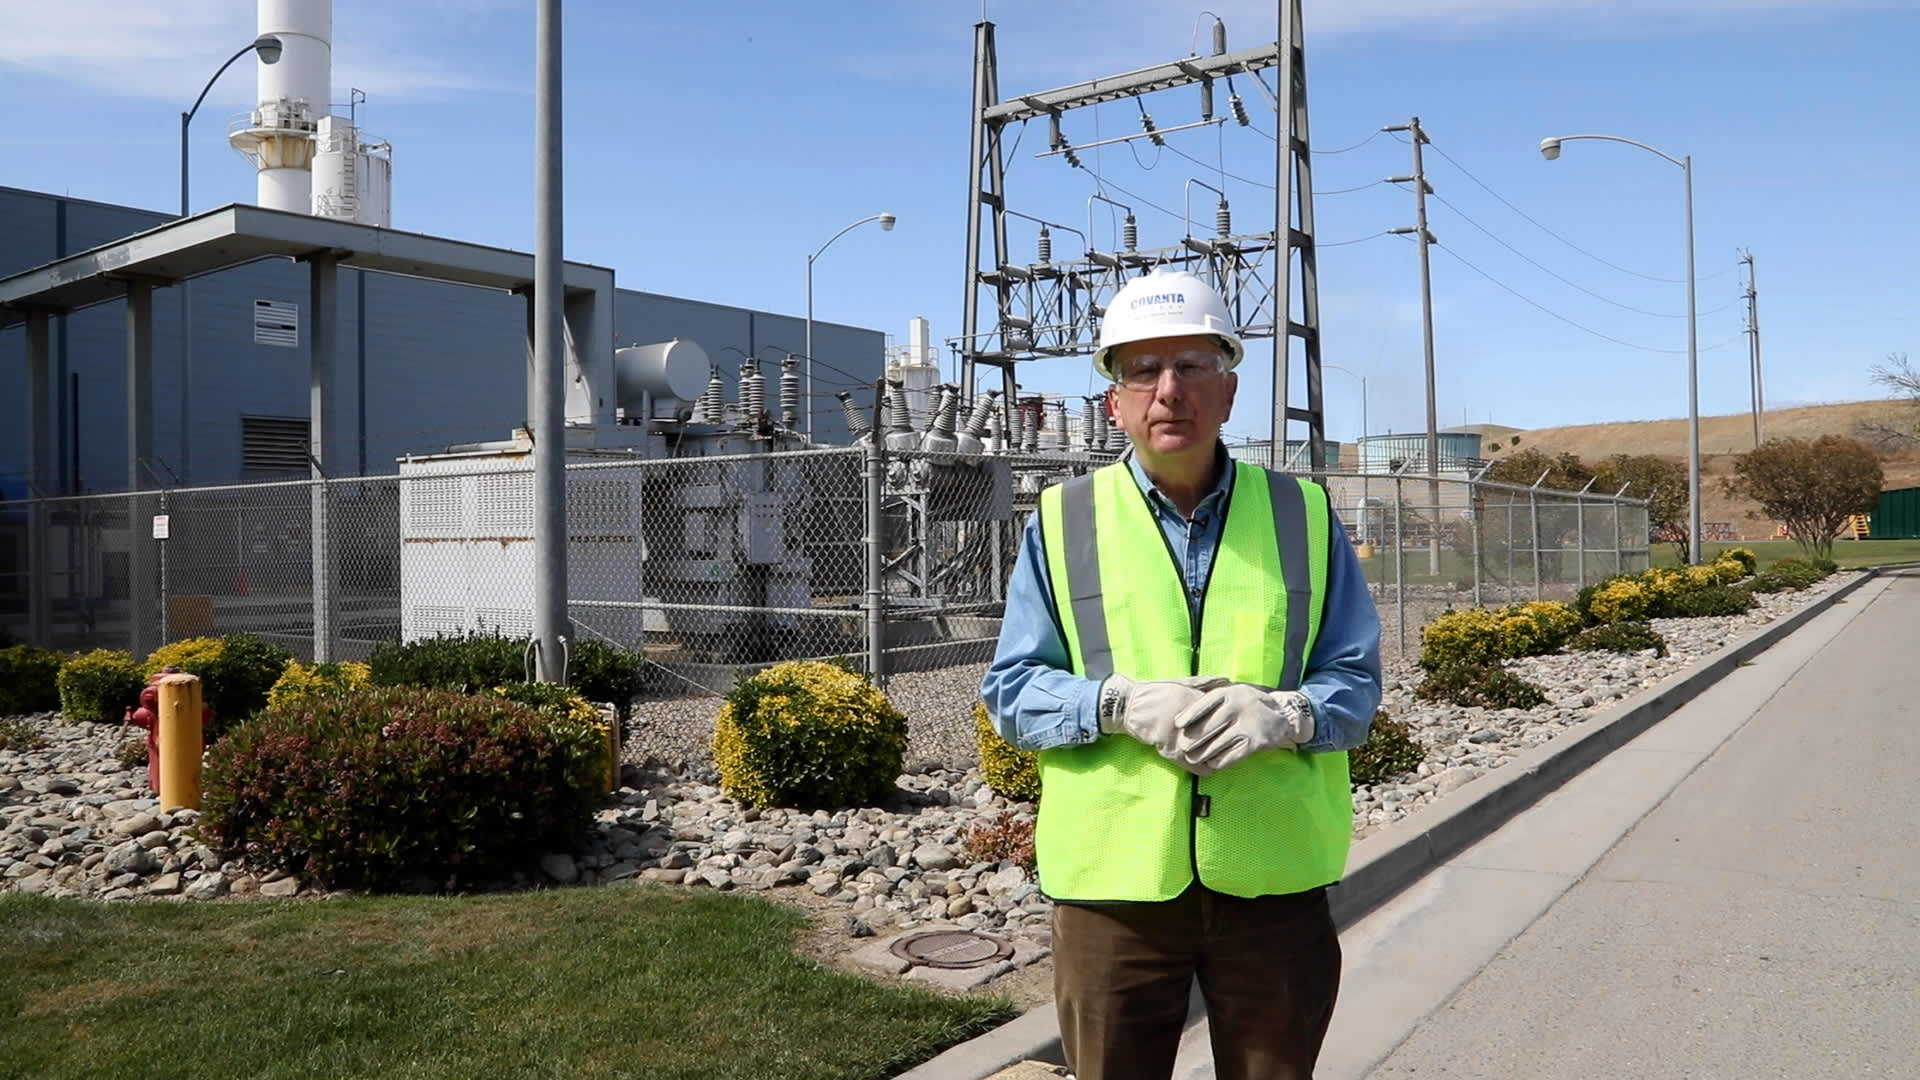 Covanta chief sustainability officer Paul Gilman stands in front of the Stanislaus County switchyard on April 13, 2022, where the incineration of waste generates enough electricity to power 18,000 homes in the area.